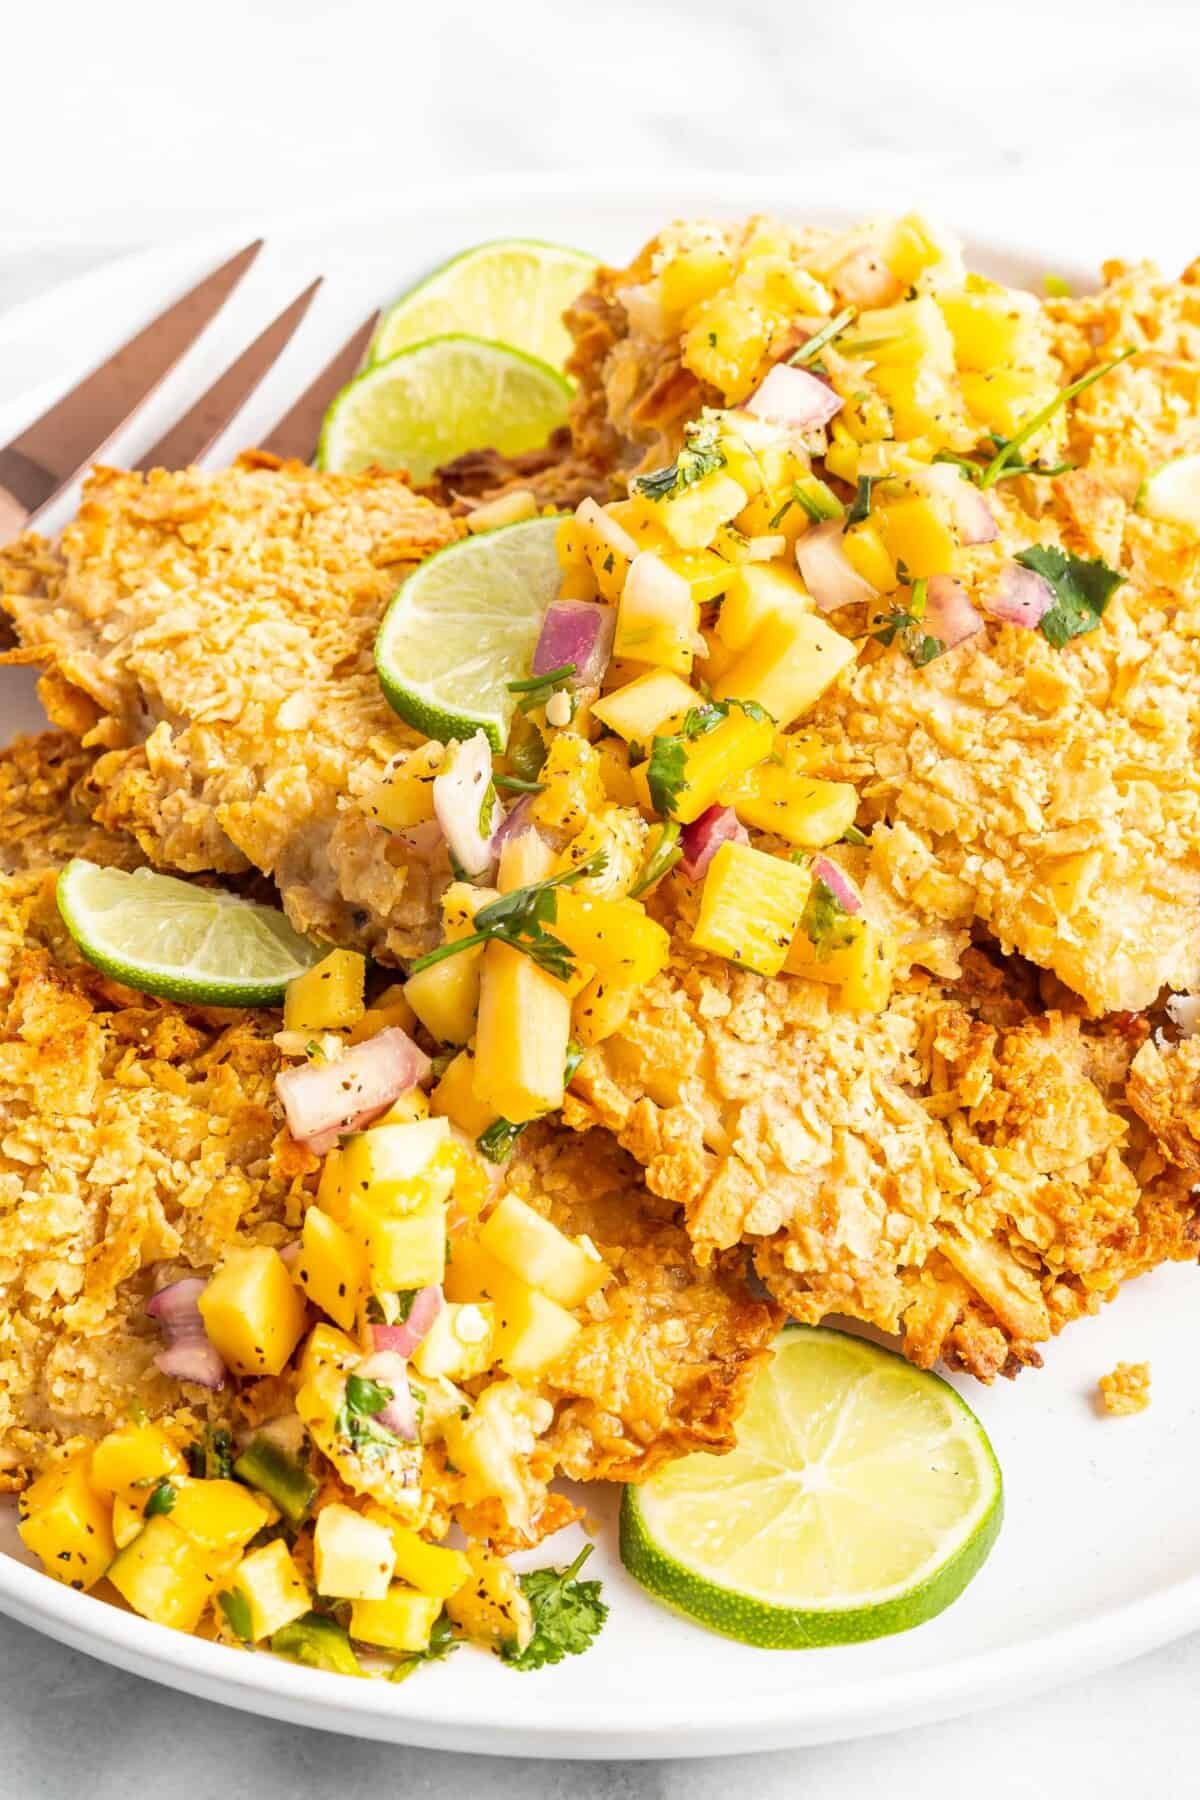 Baked tortilla crusted tilapia is garnished with limes and mango.